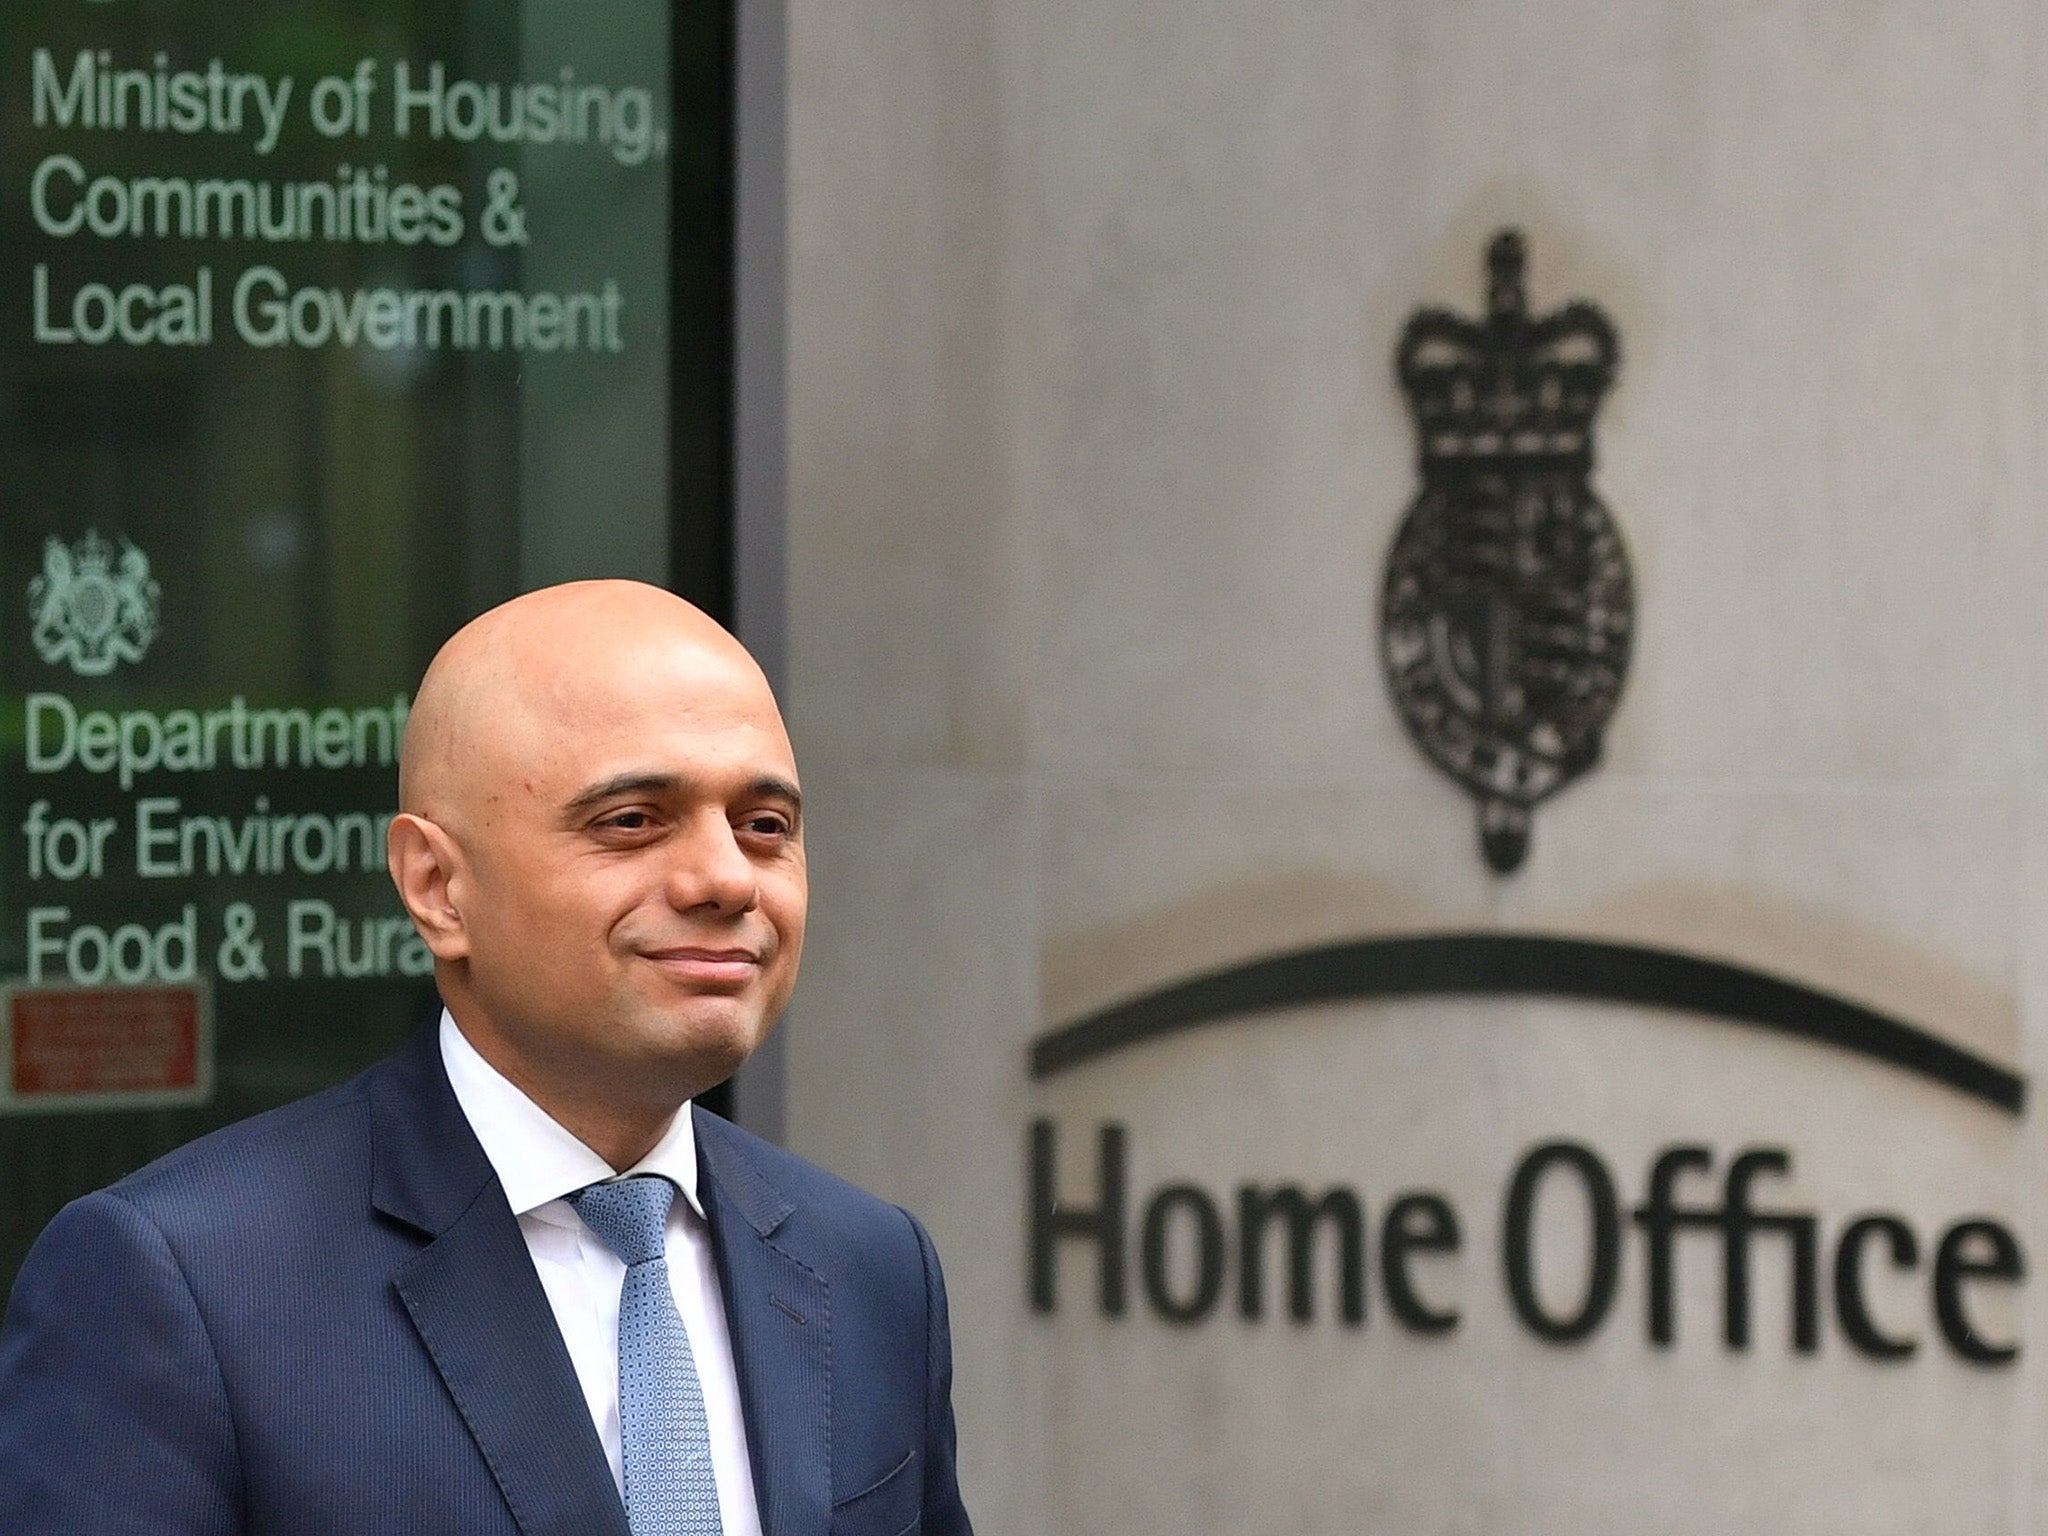 Sajid Javid was appointed to replace Amber Rudd, whose job was claimed by the Windrush scandal